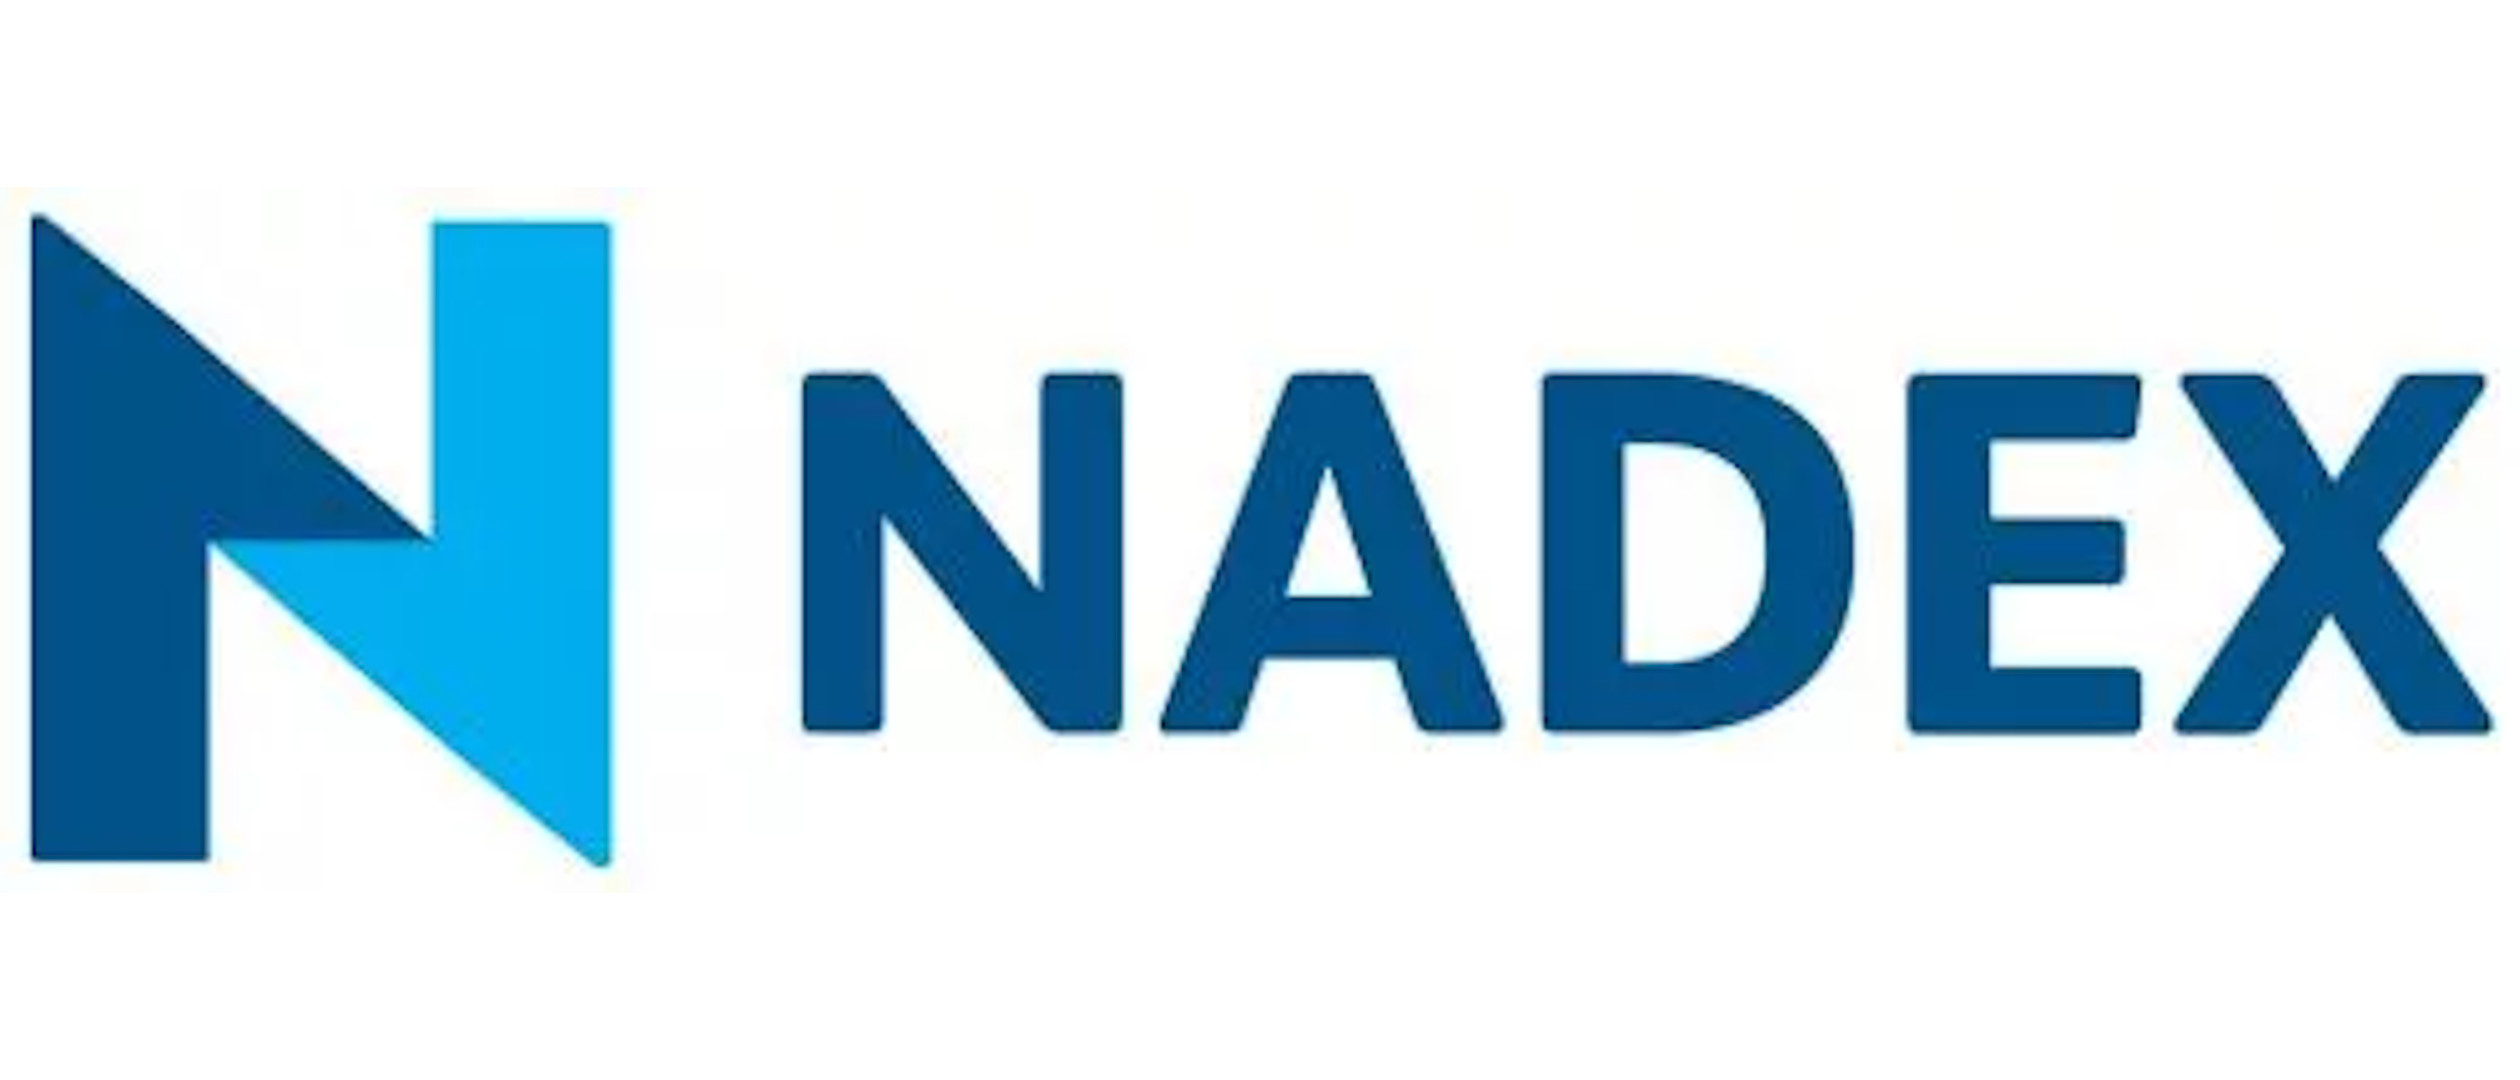 what happened to nadex app